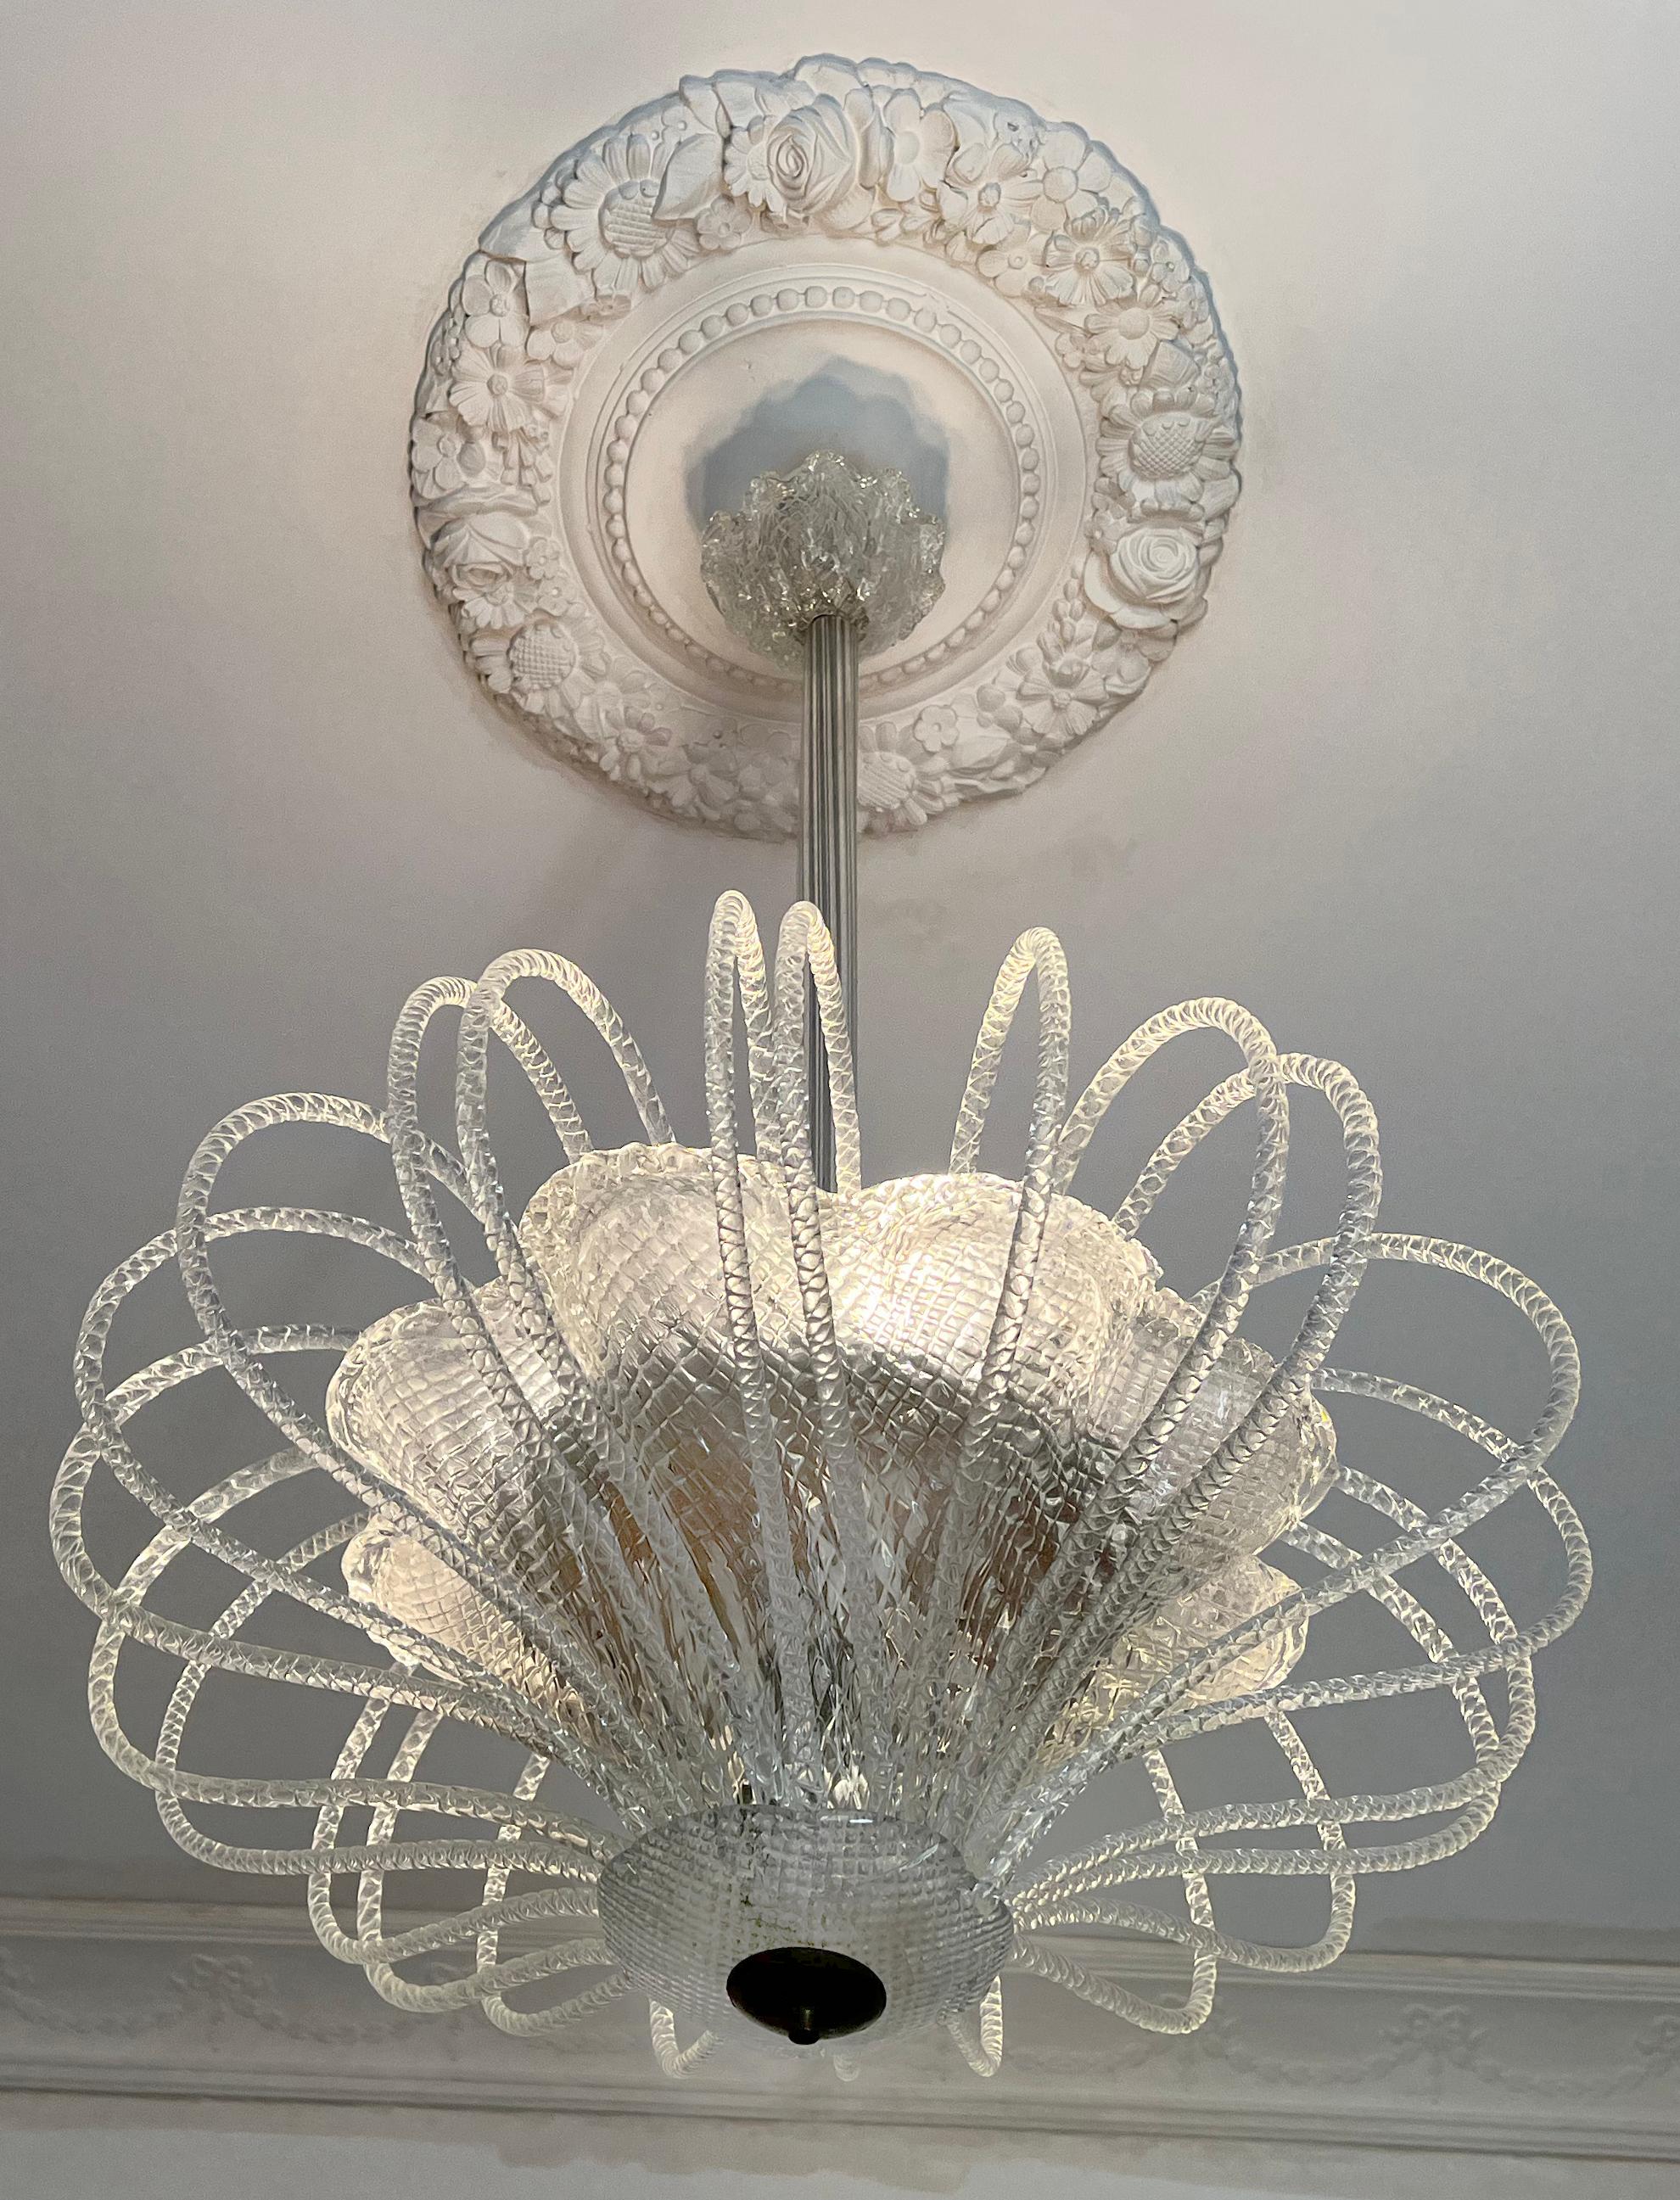 An extremely delicate and elegant chandelier by the famous Murano factory Barovier & Toso. Nearly two dozen glass spouts forming a stunning fountain of light. Placed the center of the room, a light sculpture gives the space a magical aura.

Light